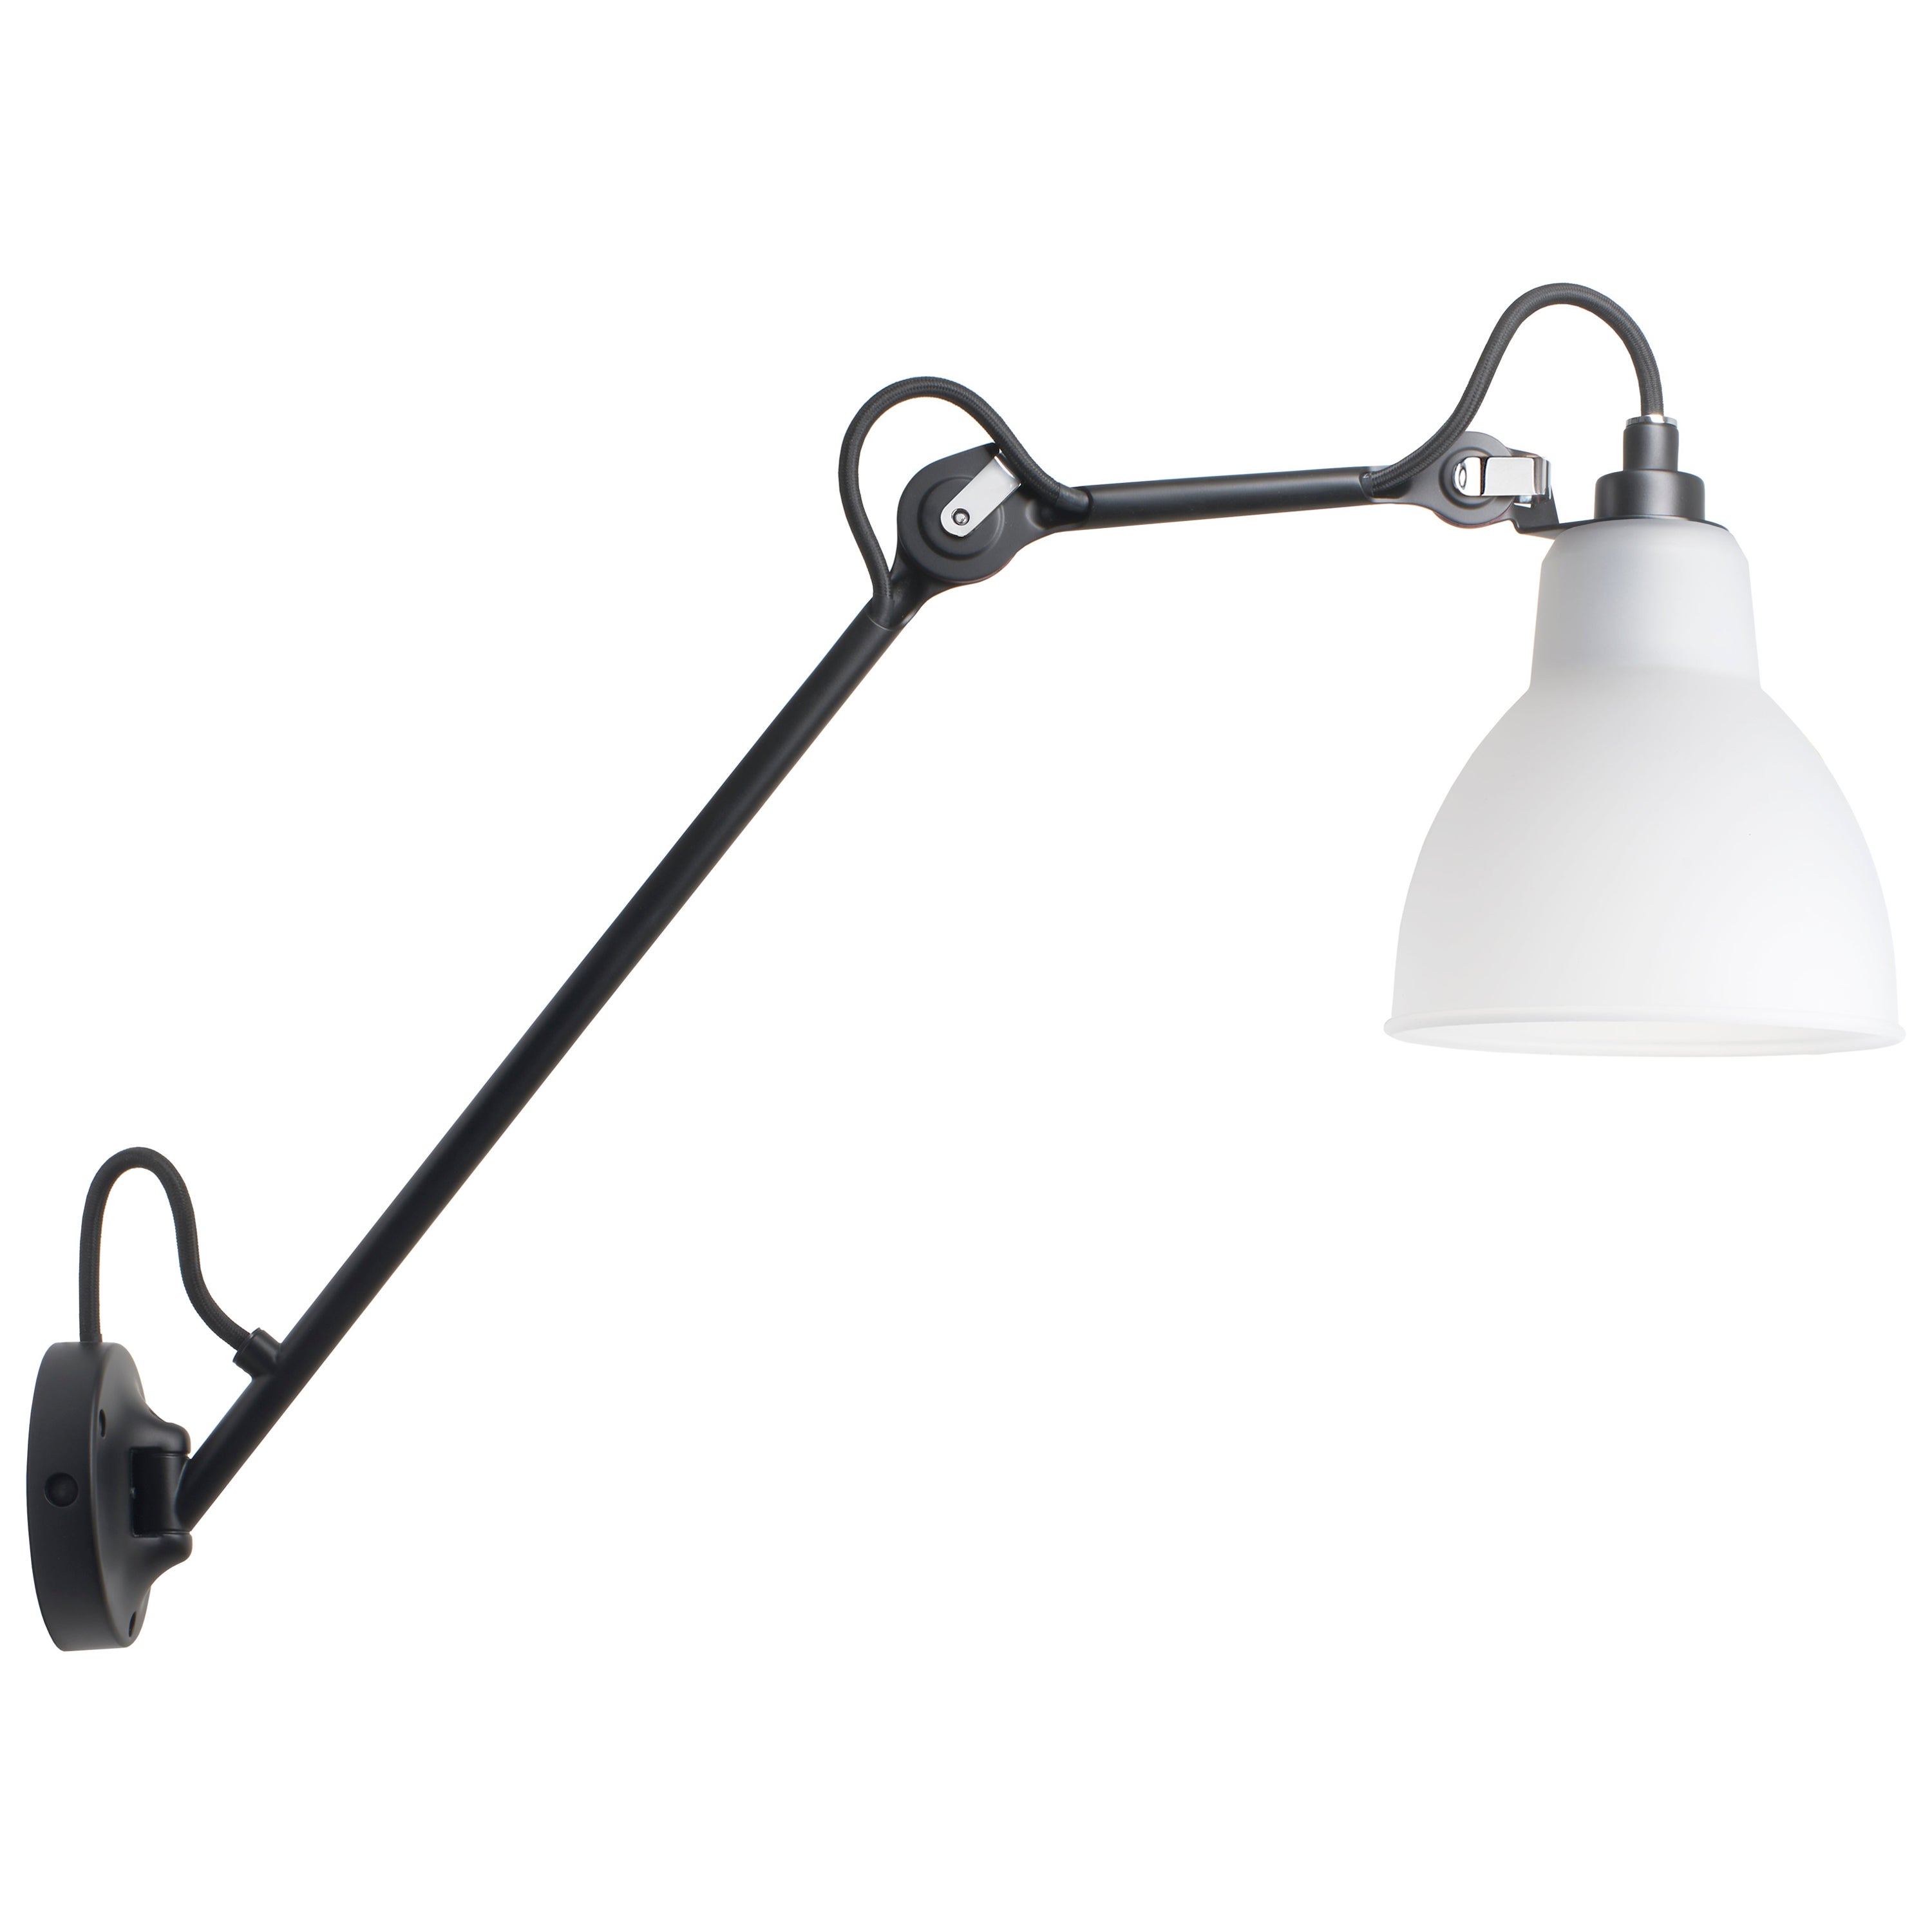 DCW Editions La Lampe Gras N°122 Wall Lamp in Black Arm and Polycarbonate Shade For Sale